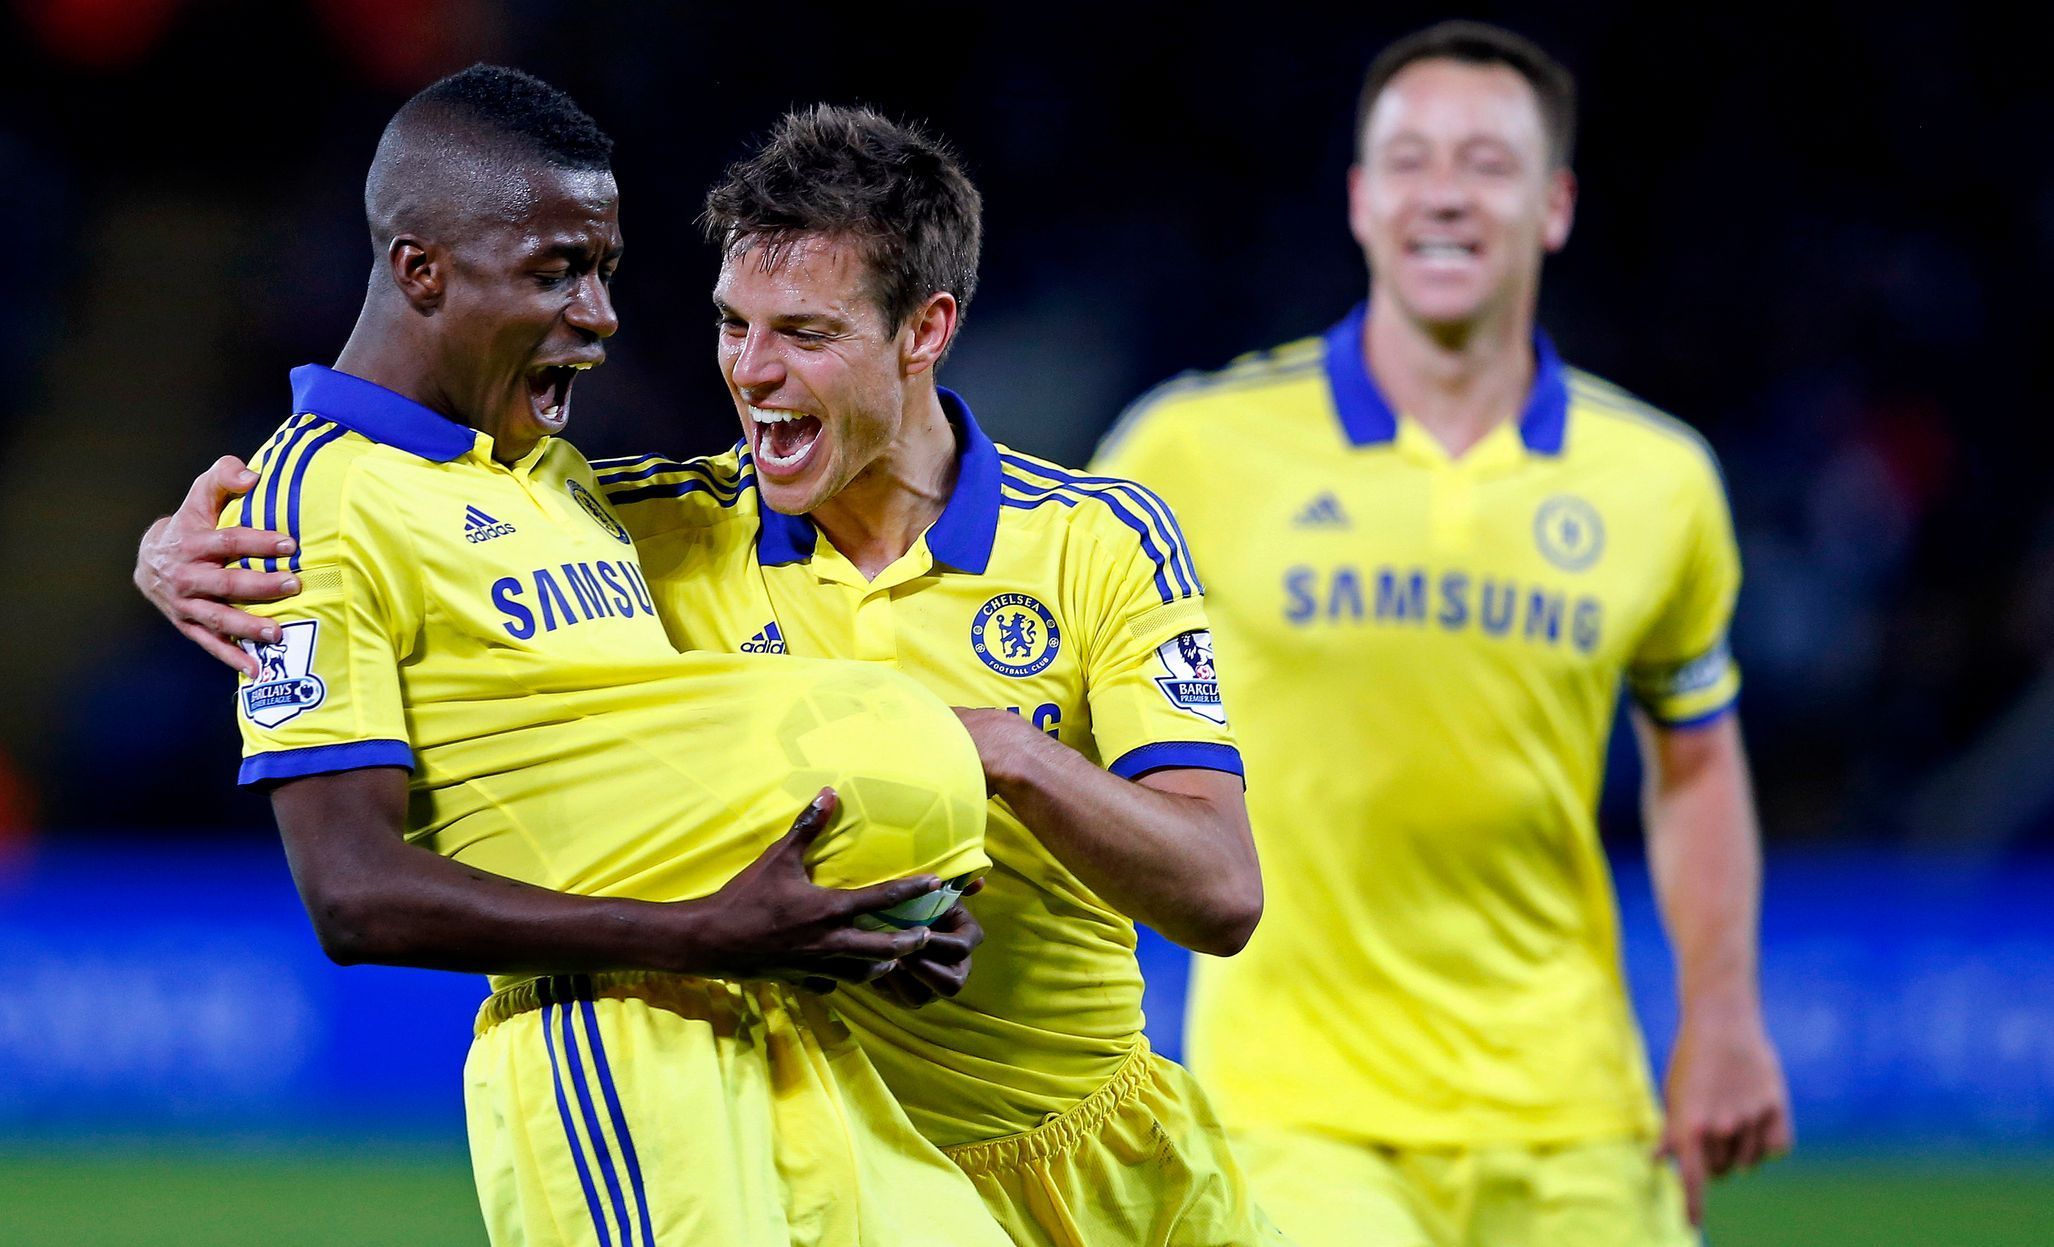 Football: Ramires celebrates with Cesar Azpilicueta after scoring the third goal for Chelsea